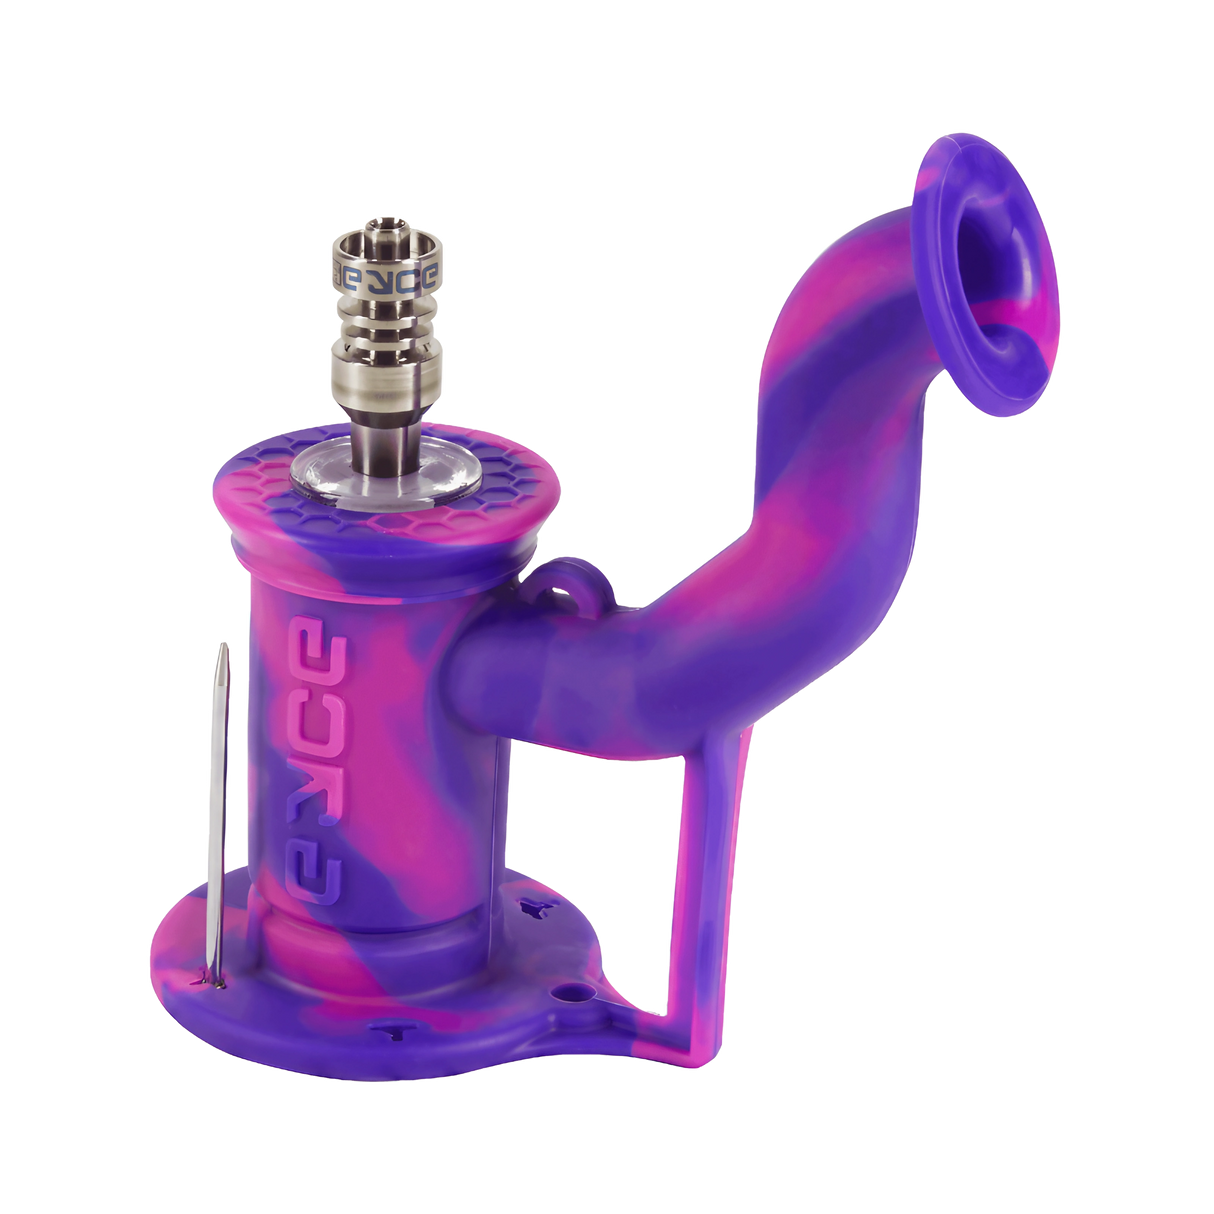 EYCE Rig 2.0 silicone dab rig in Flower Purple with titanium nail, angled side view